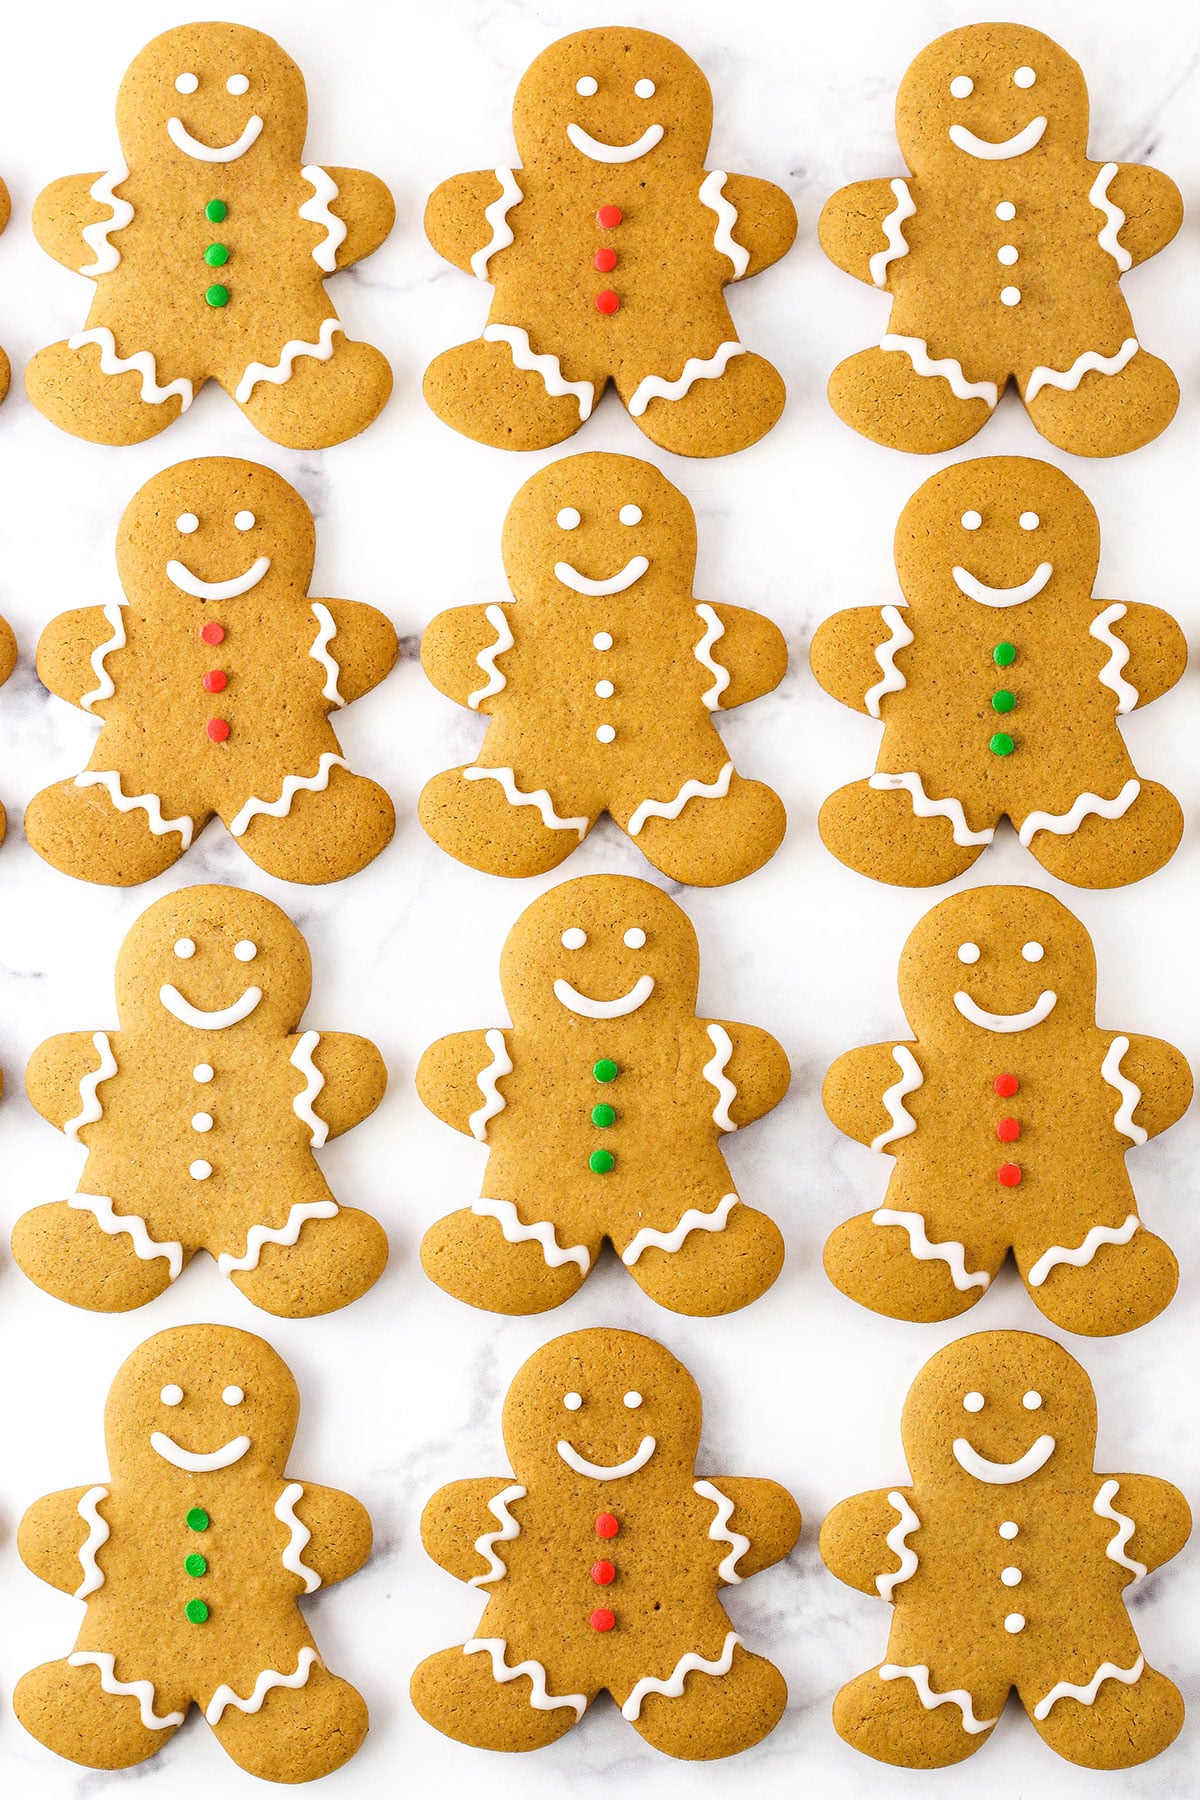 Overhead view of Gingerbread Cookies decorated with white, green and red frosting spread out on a white table